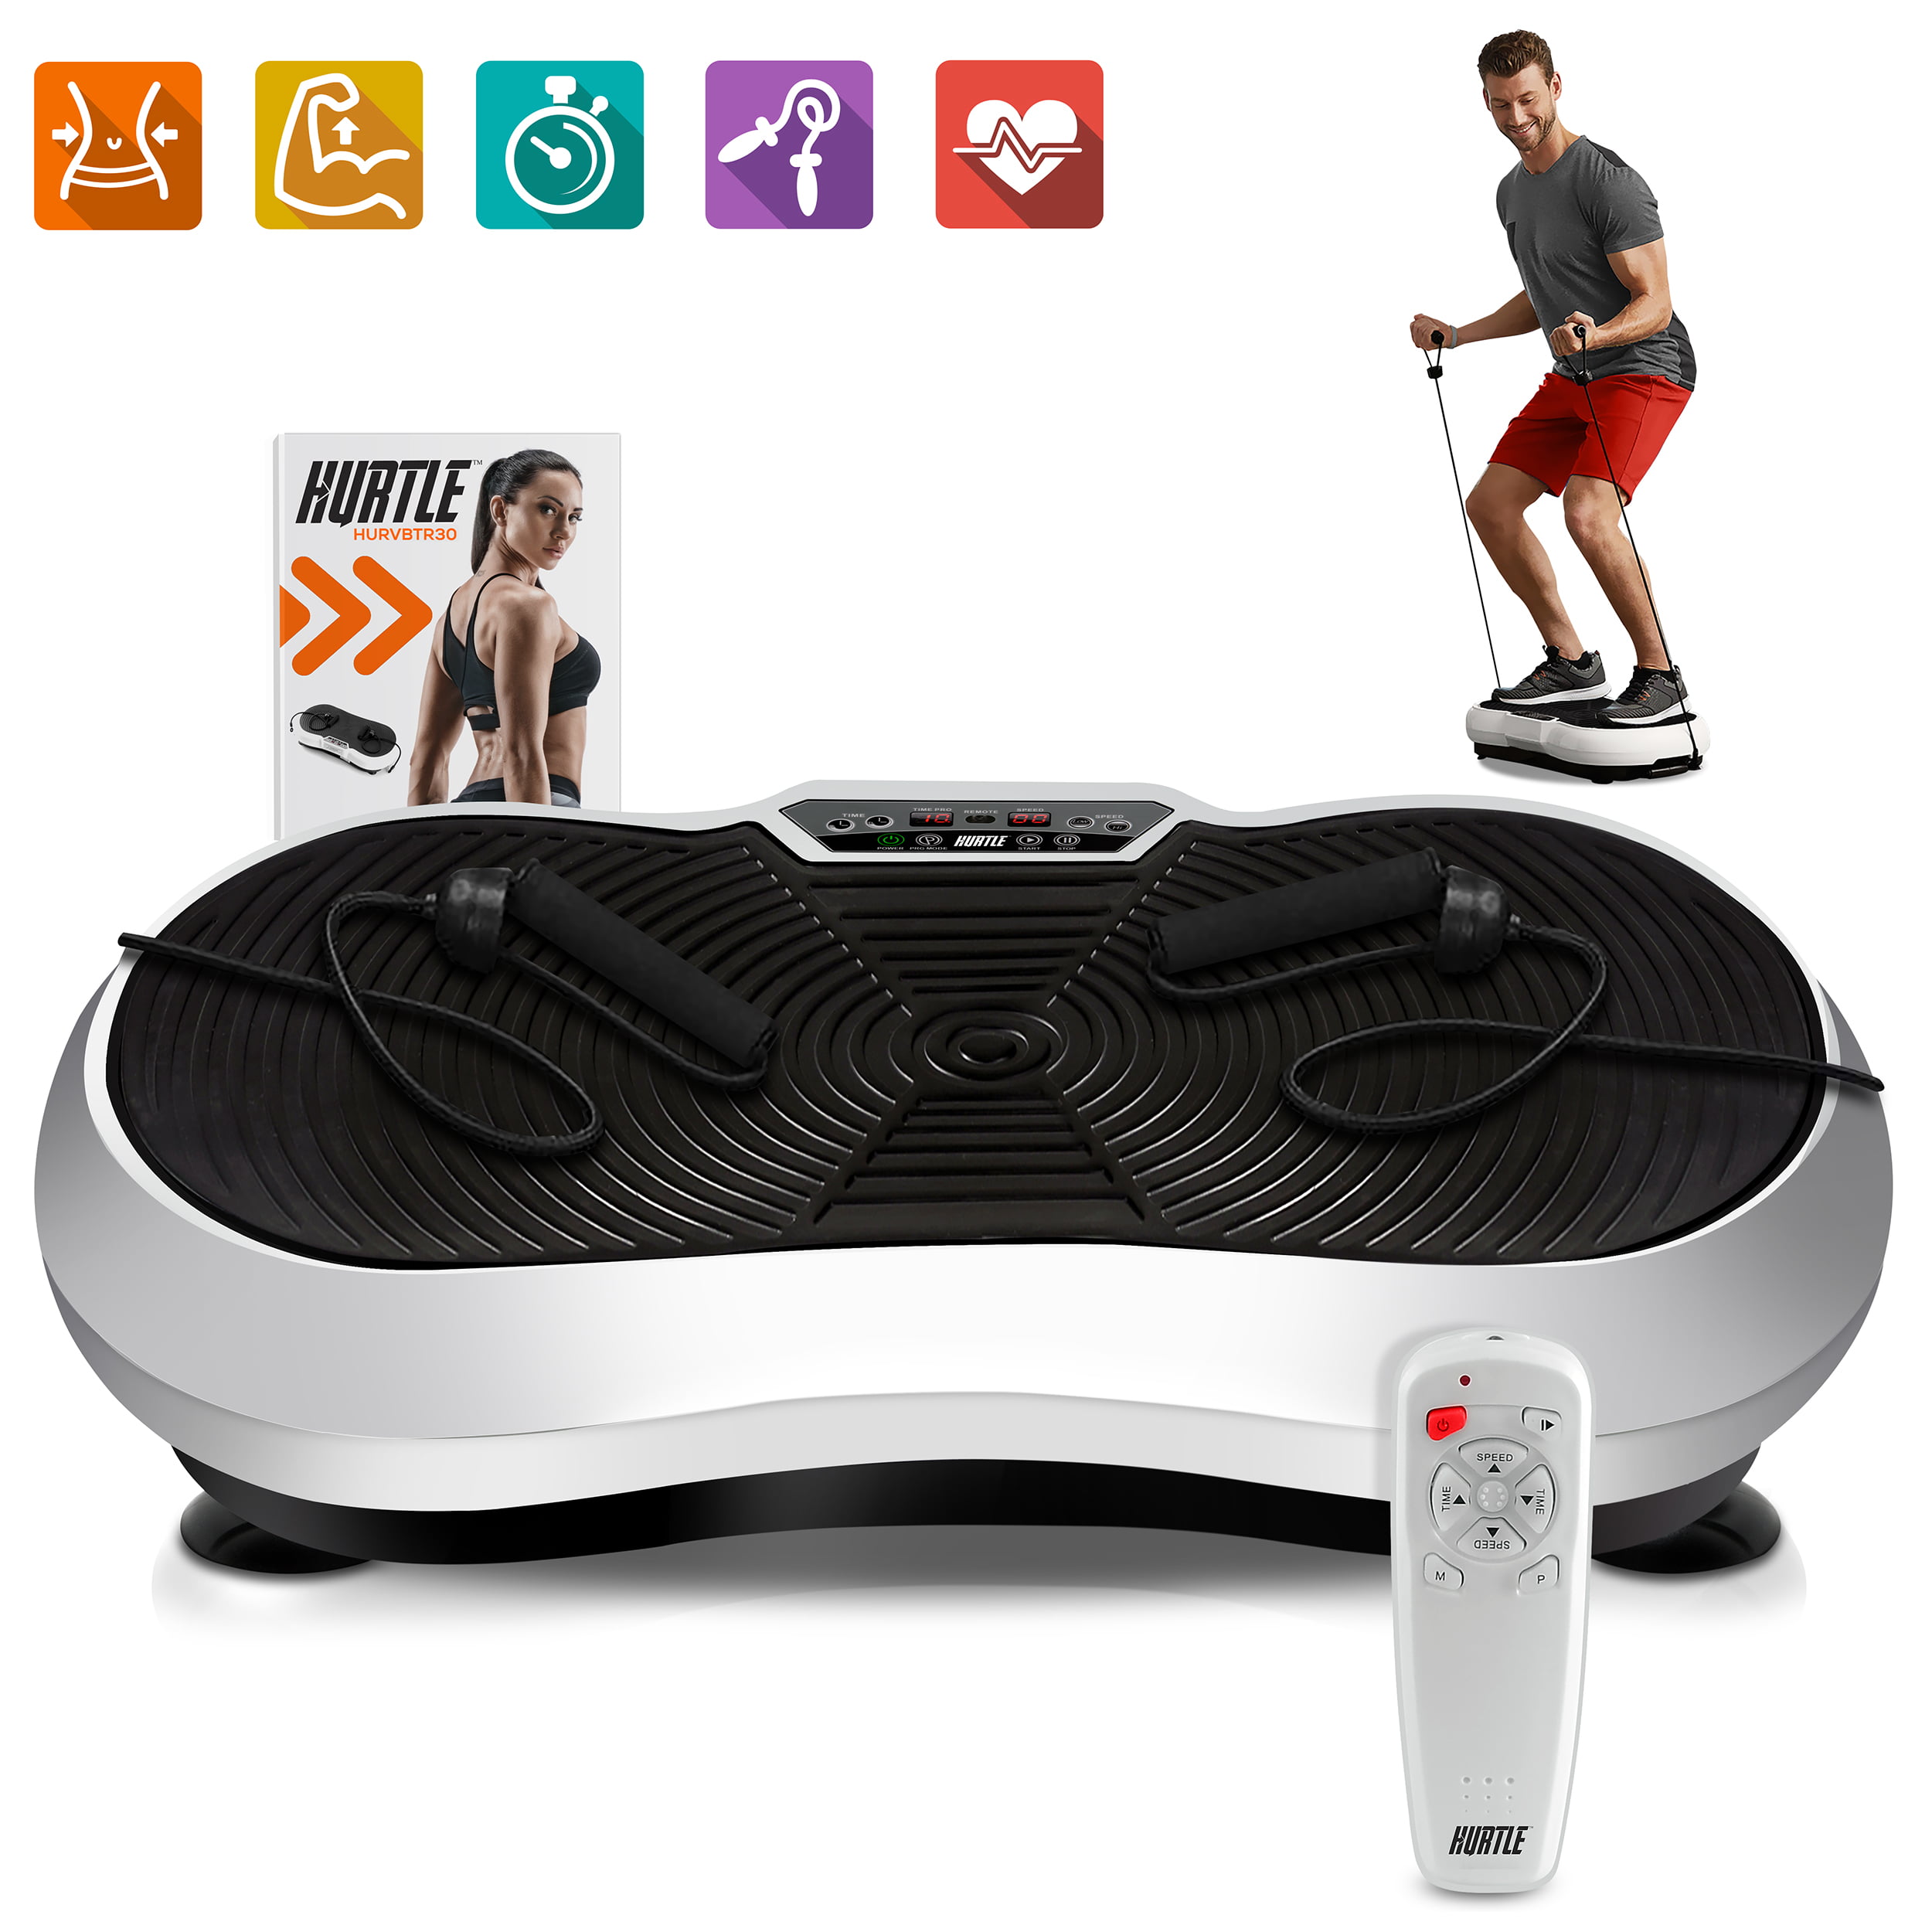 99 Levels-Home&Travel Weight Loss,Toning&Wellness Tengma Vibration Machine Exercise Platform Fitness Whole Body Vibration Plate Trainer Fitness Fit Massage Workout Trainer w/Loop Bands+Remote